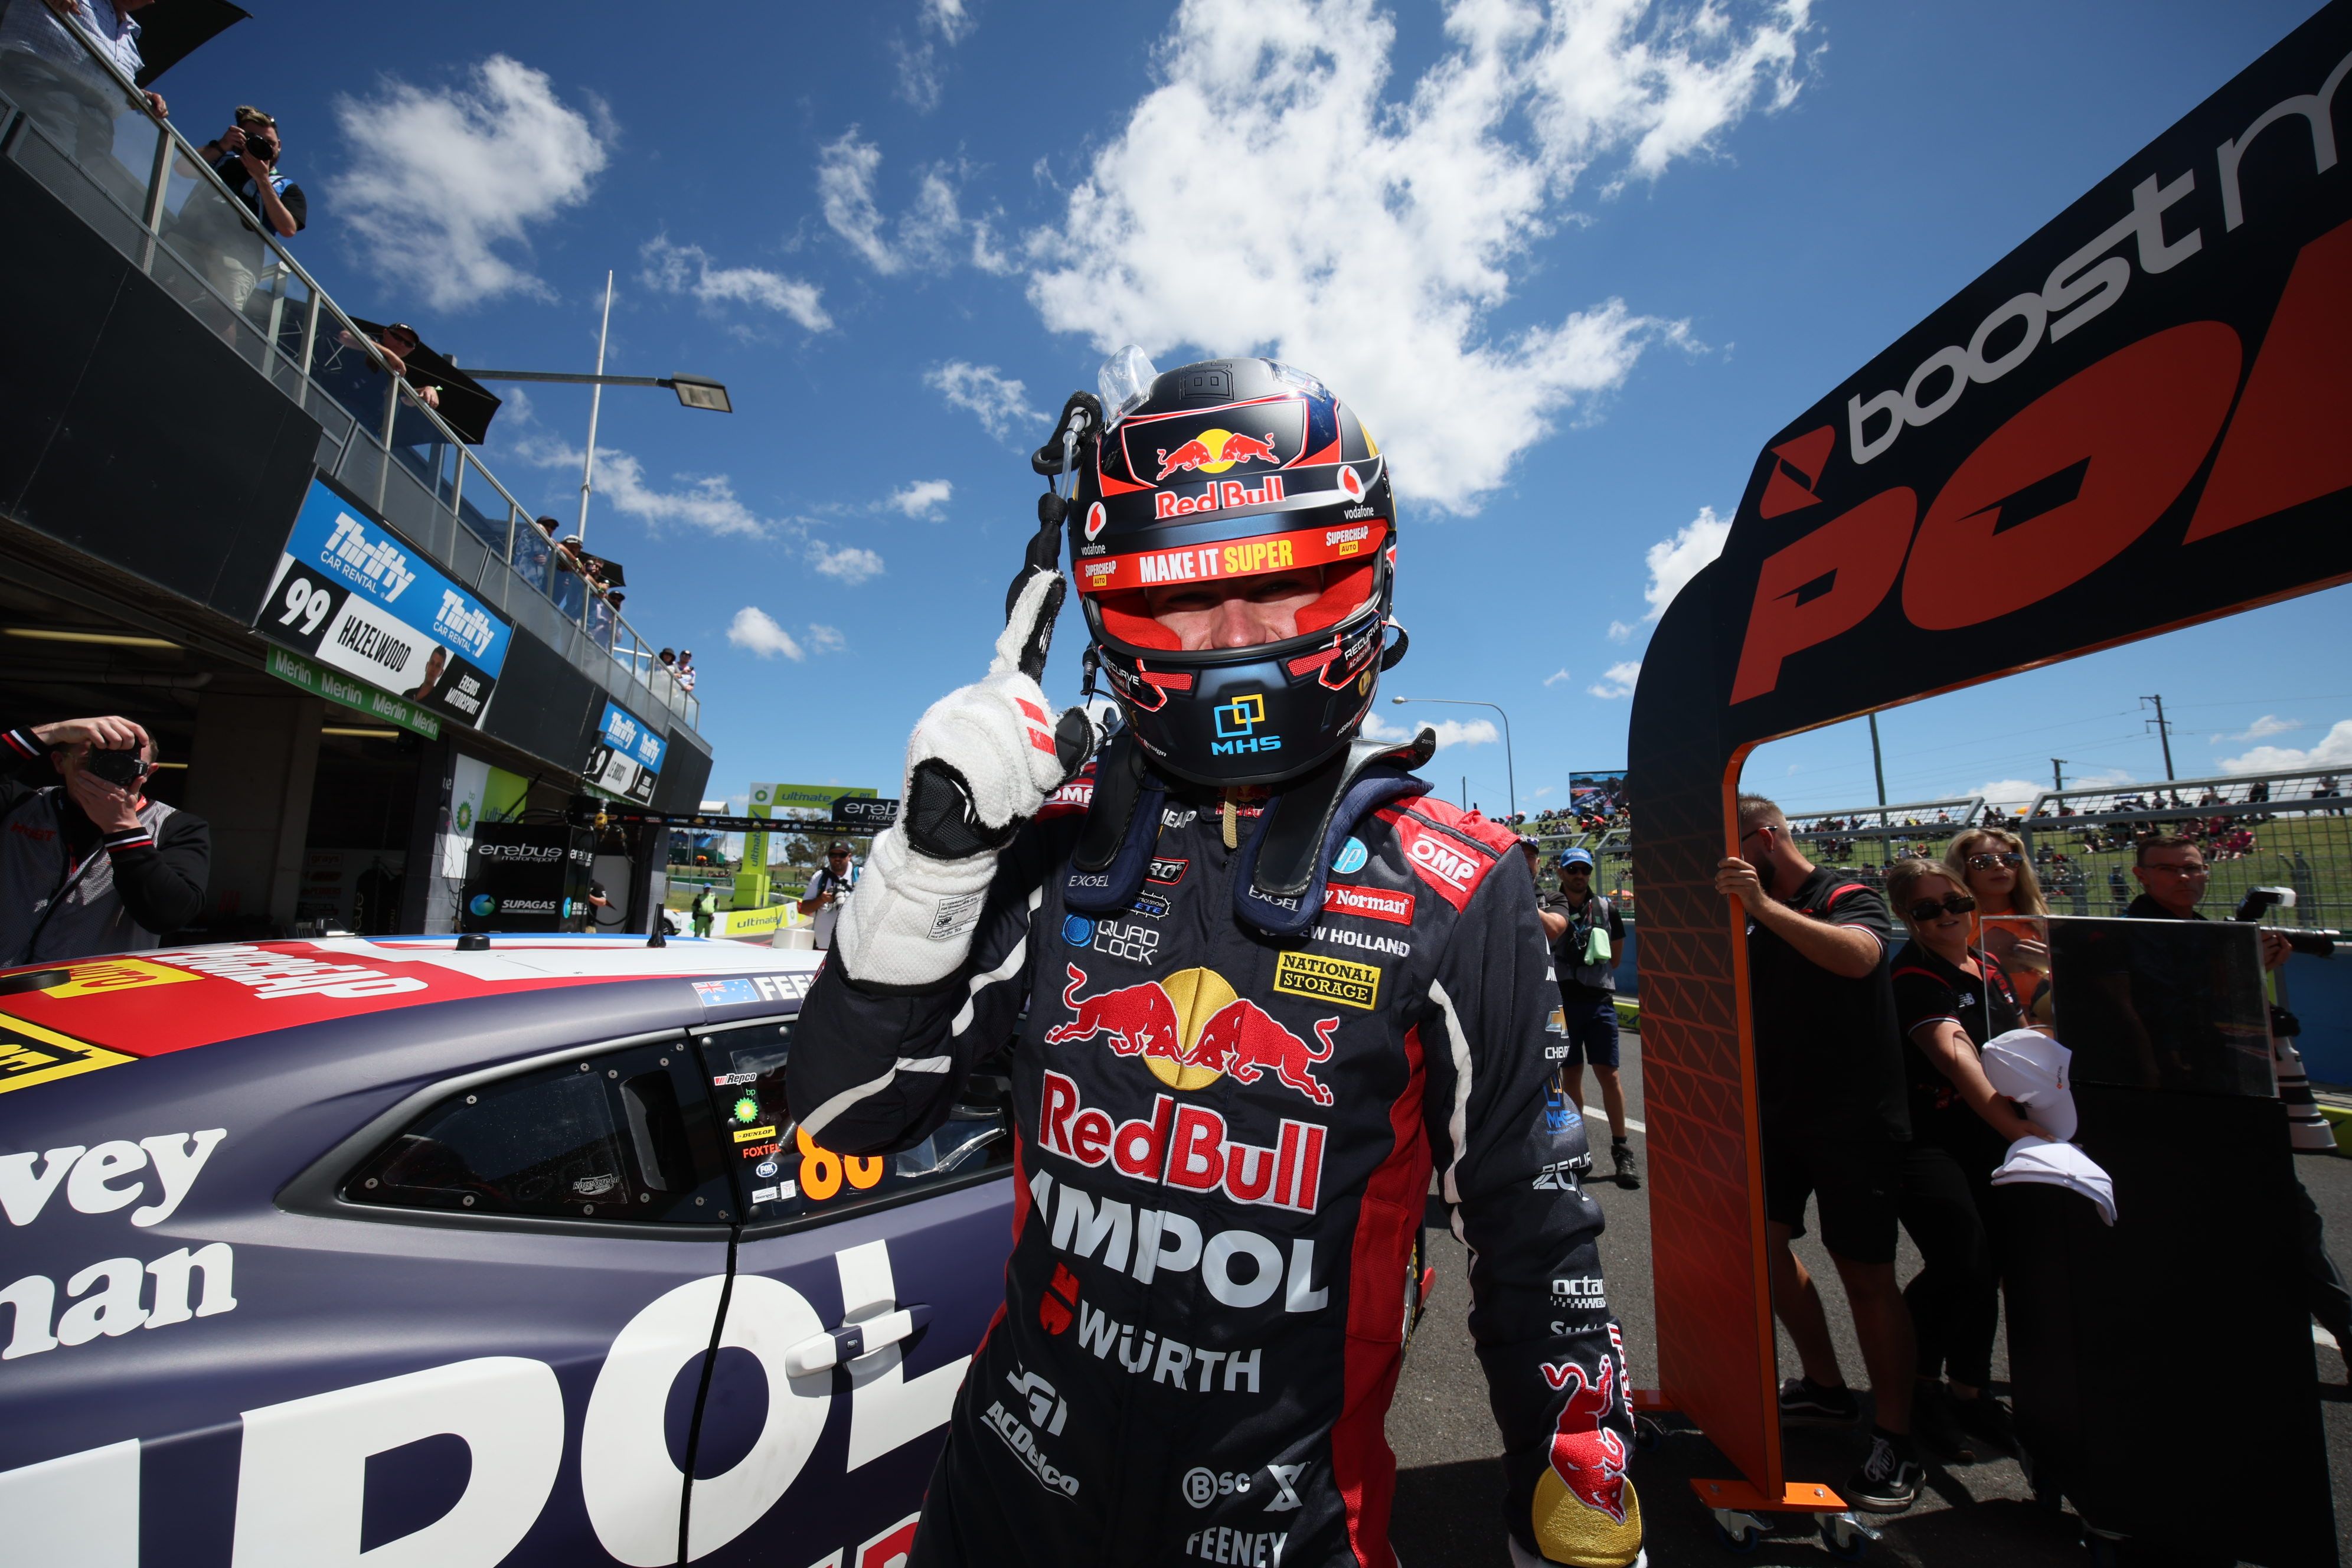 Feeney snatches Sunday pole from Mostert Supercars Bathurst